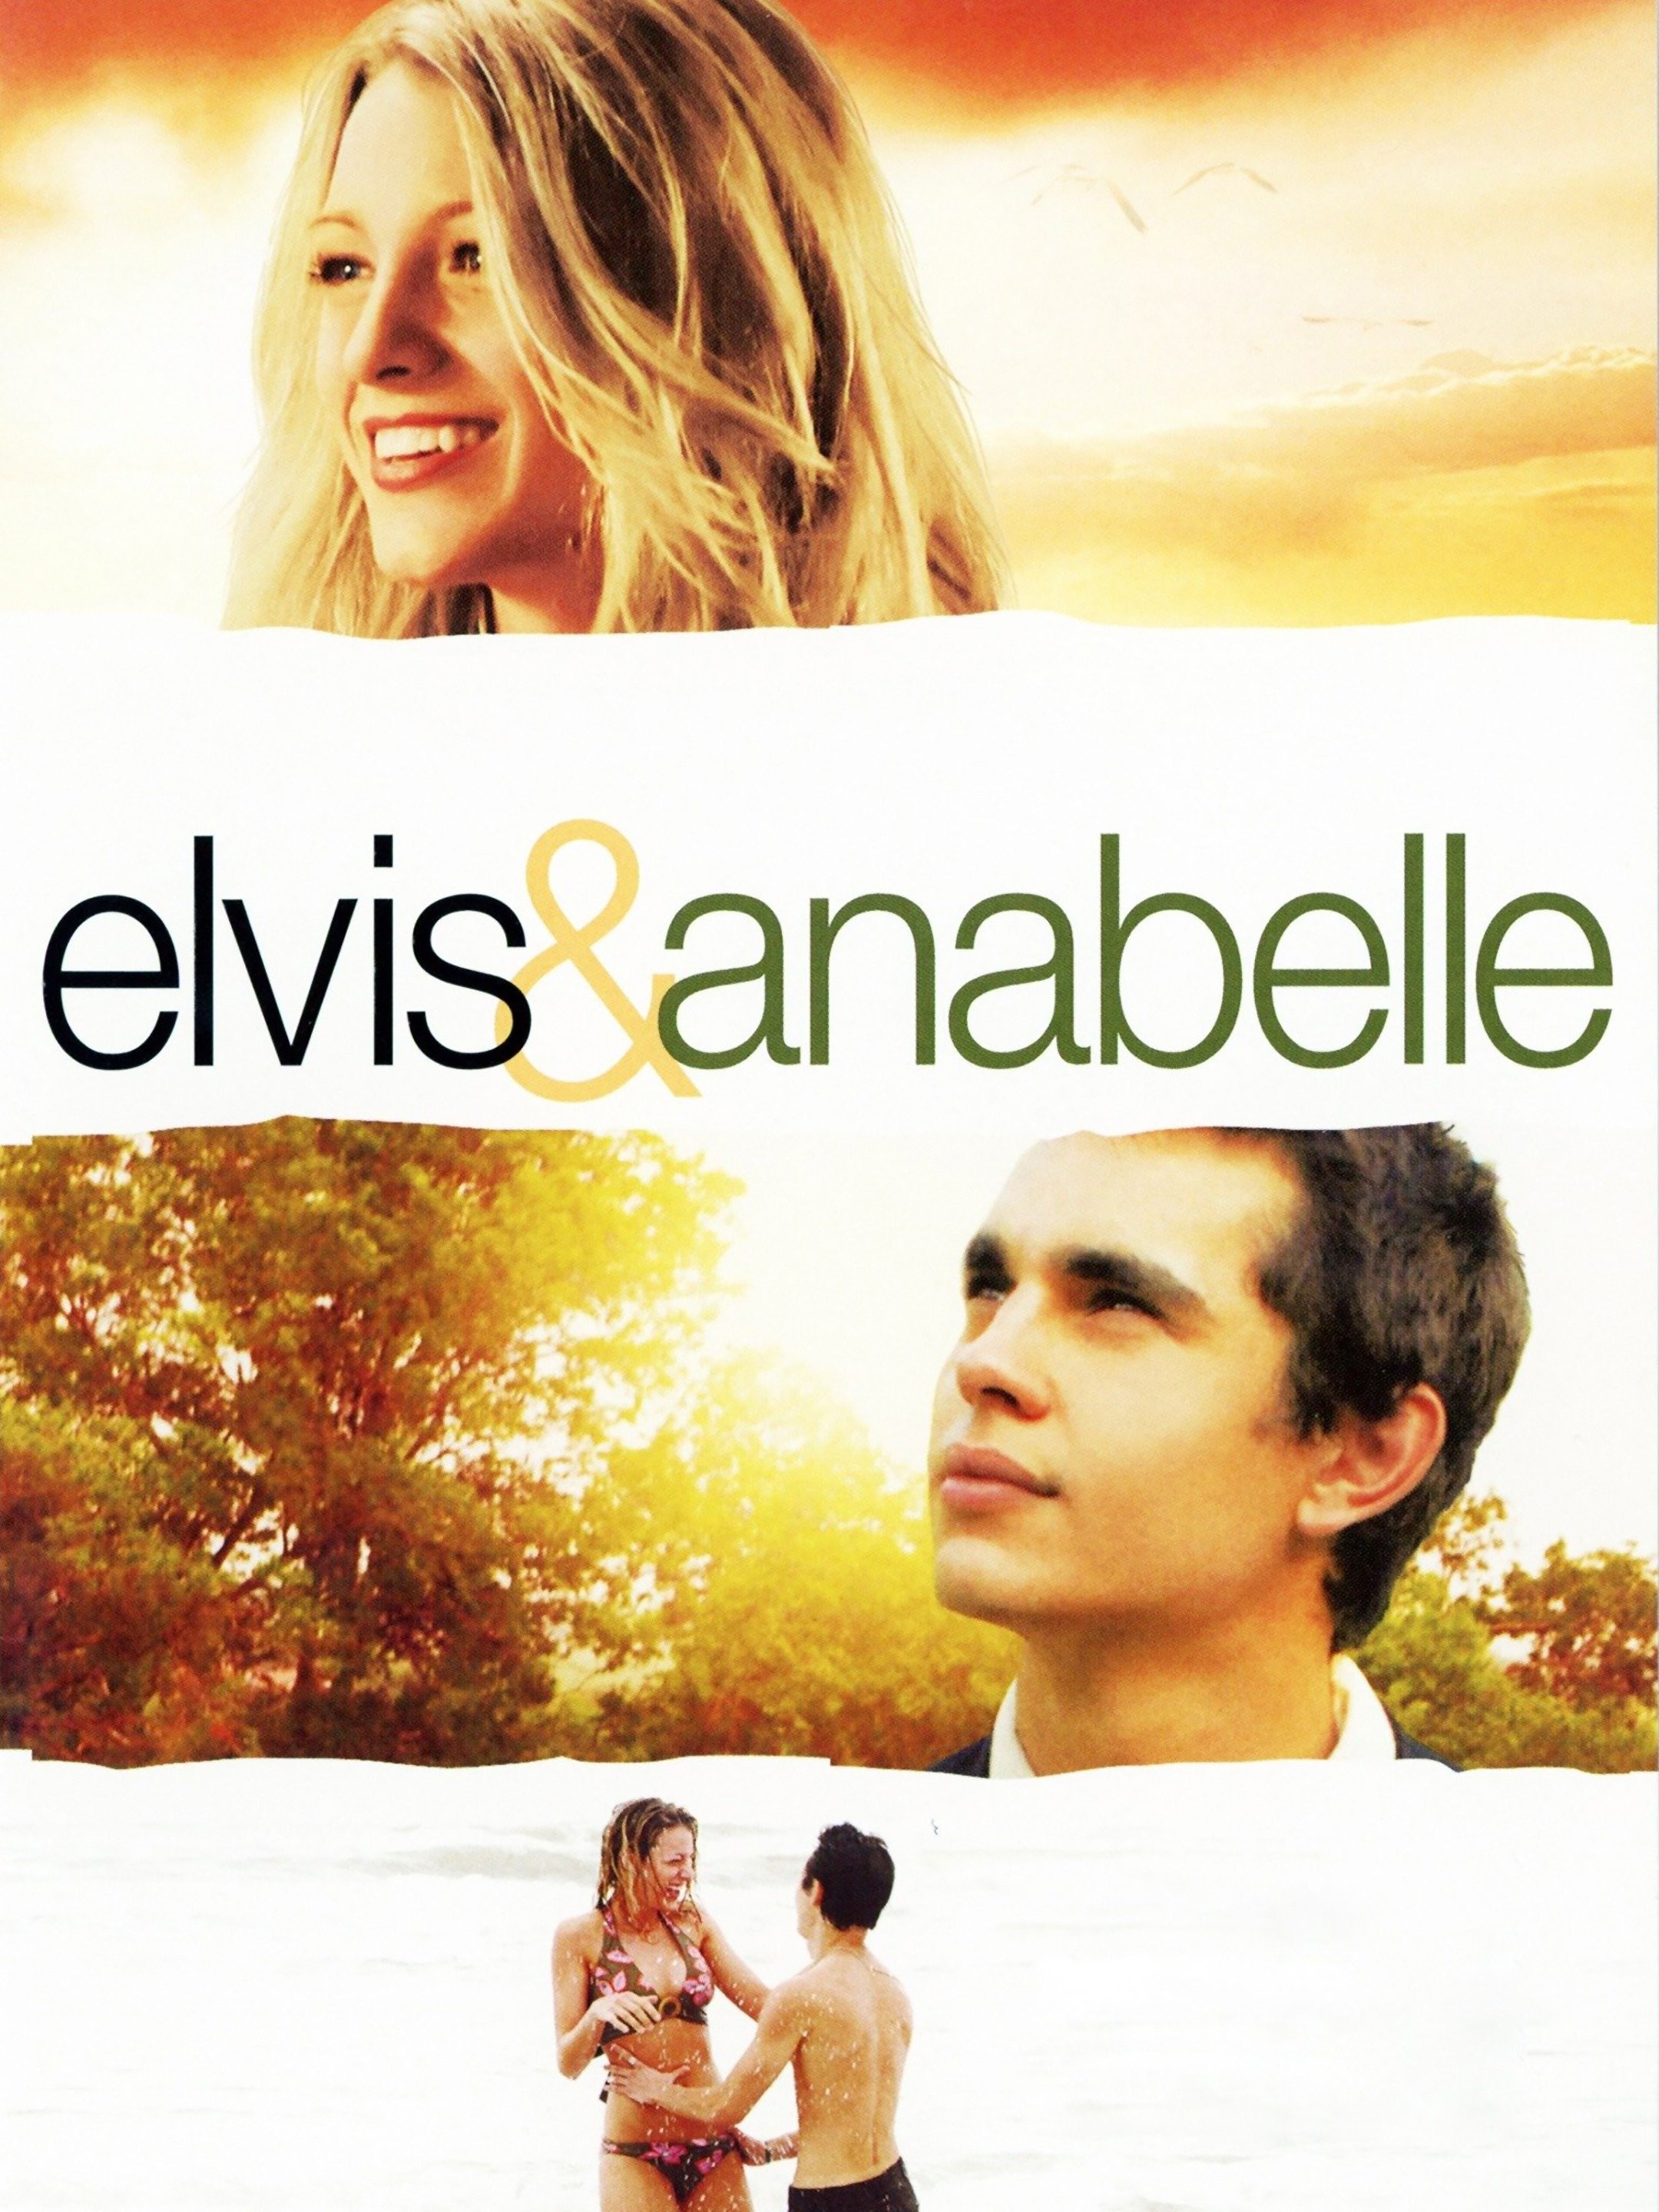 Elvis and anabelle movie